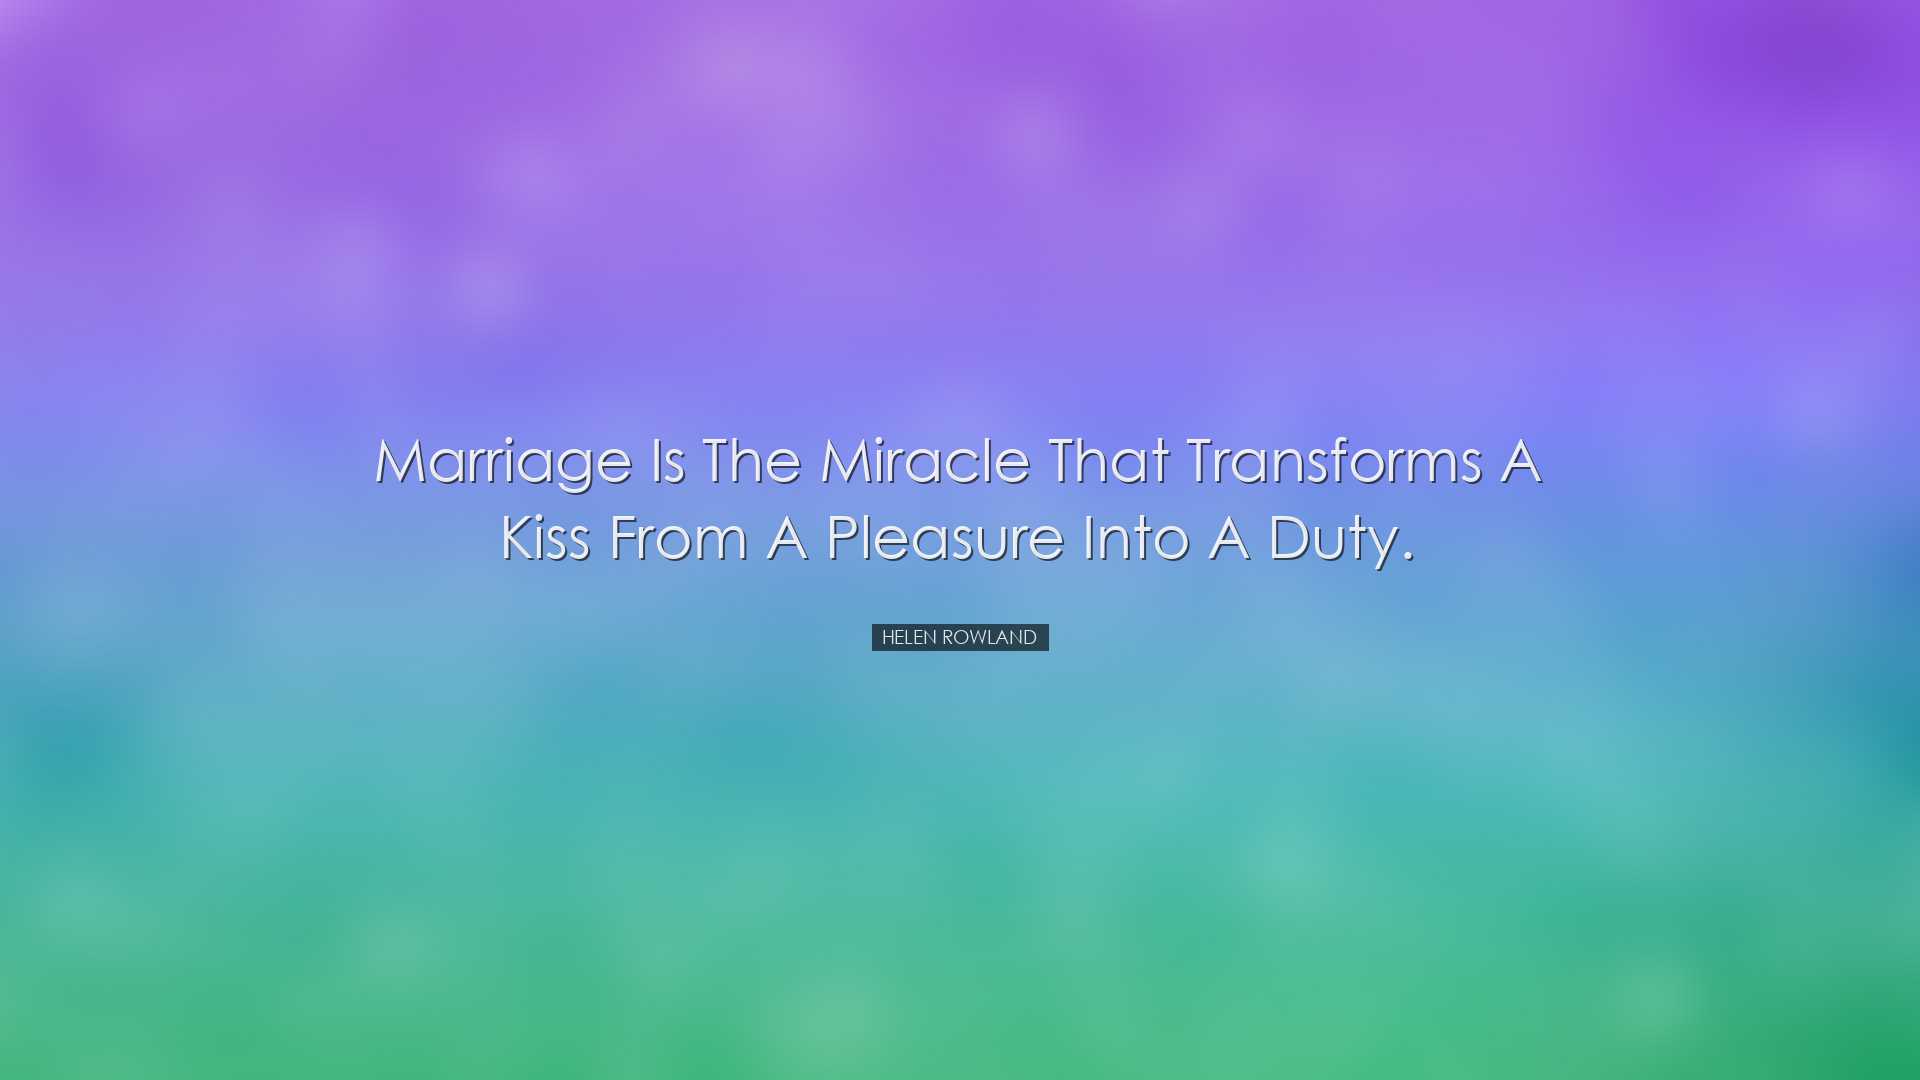 Marriage is the miracle that transforms a kiss from a pleasure int